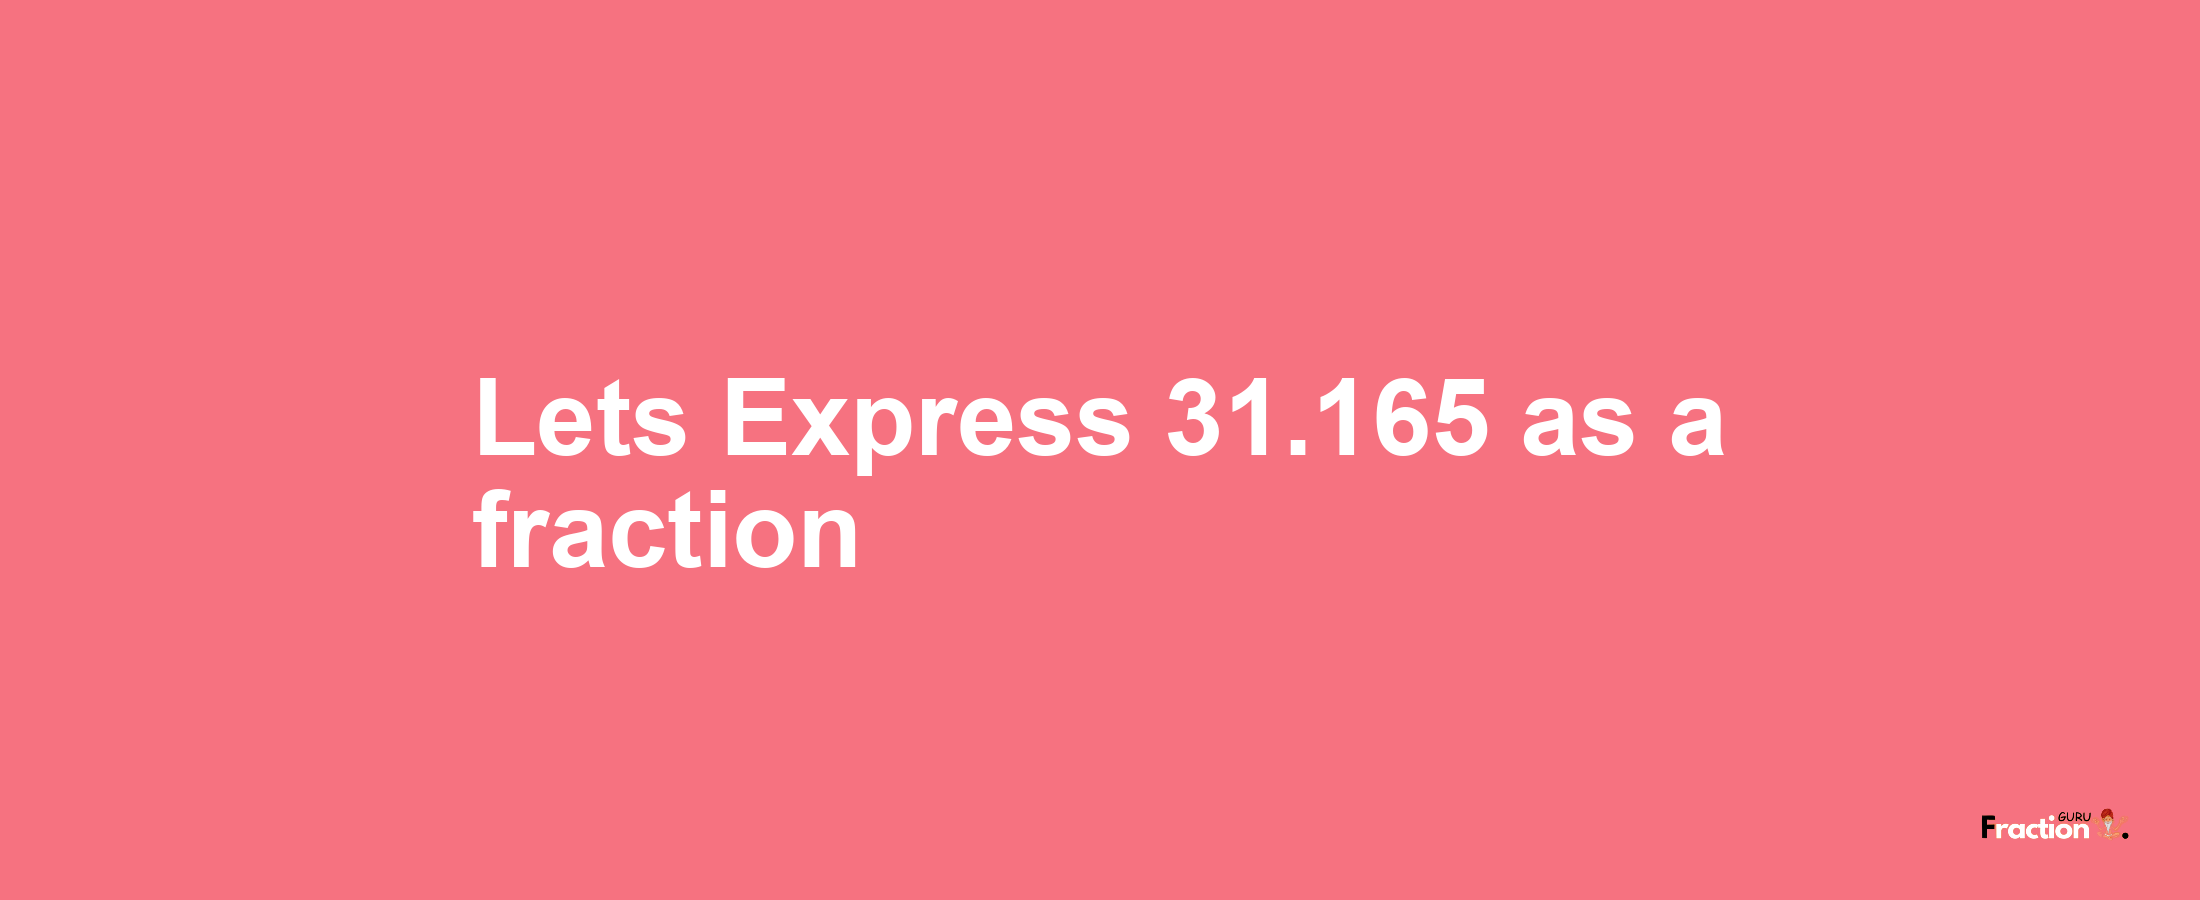 Lets Express 31.165 as afraction